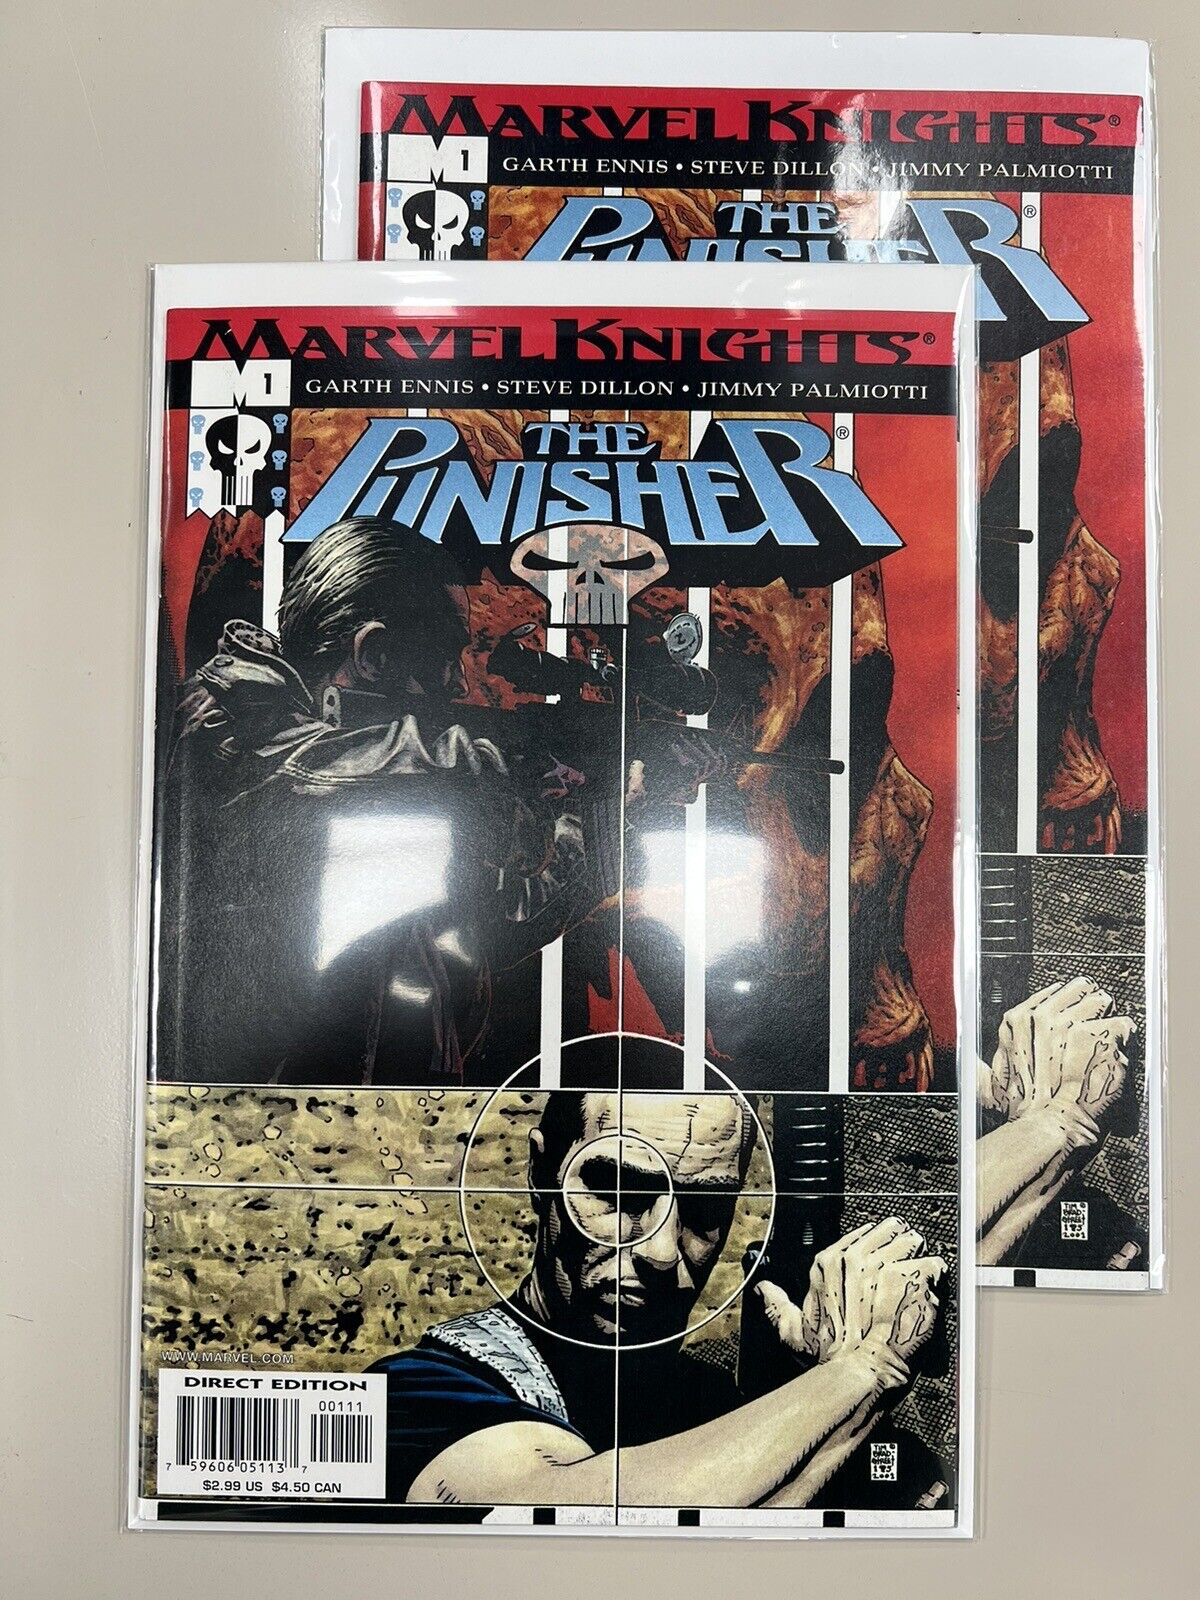 THE PUNISHER (2001 6TH SERIES) #1 AUG 2001 HIGH GRADE MARVEL 9.4 NM - 2 COPIES